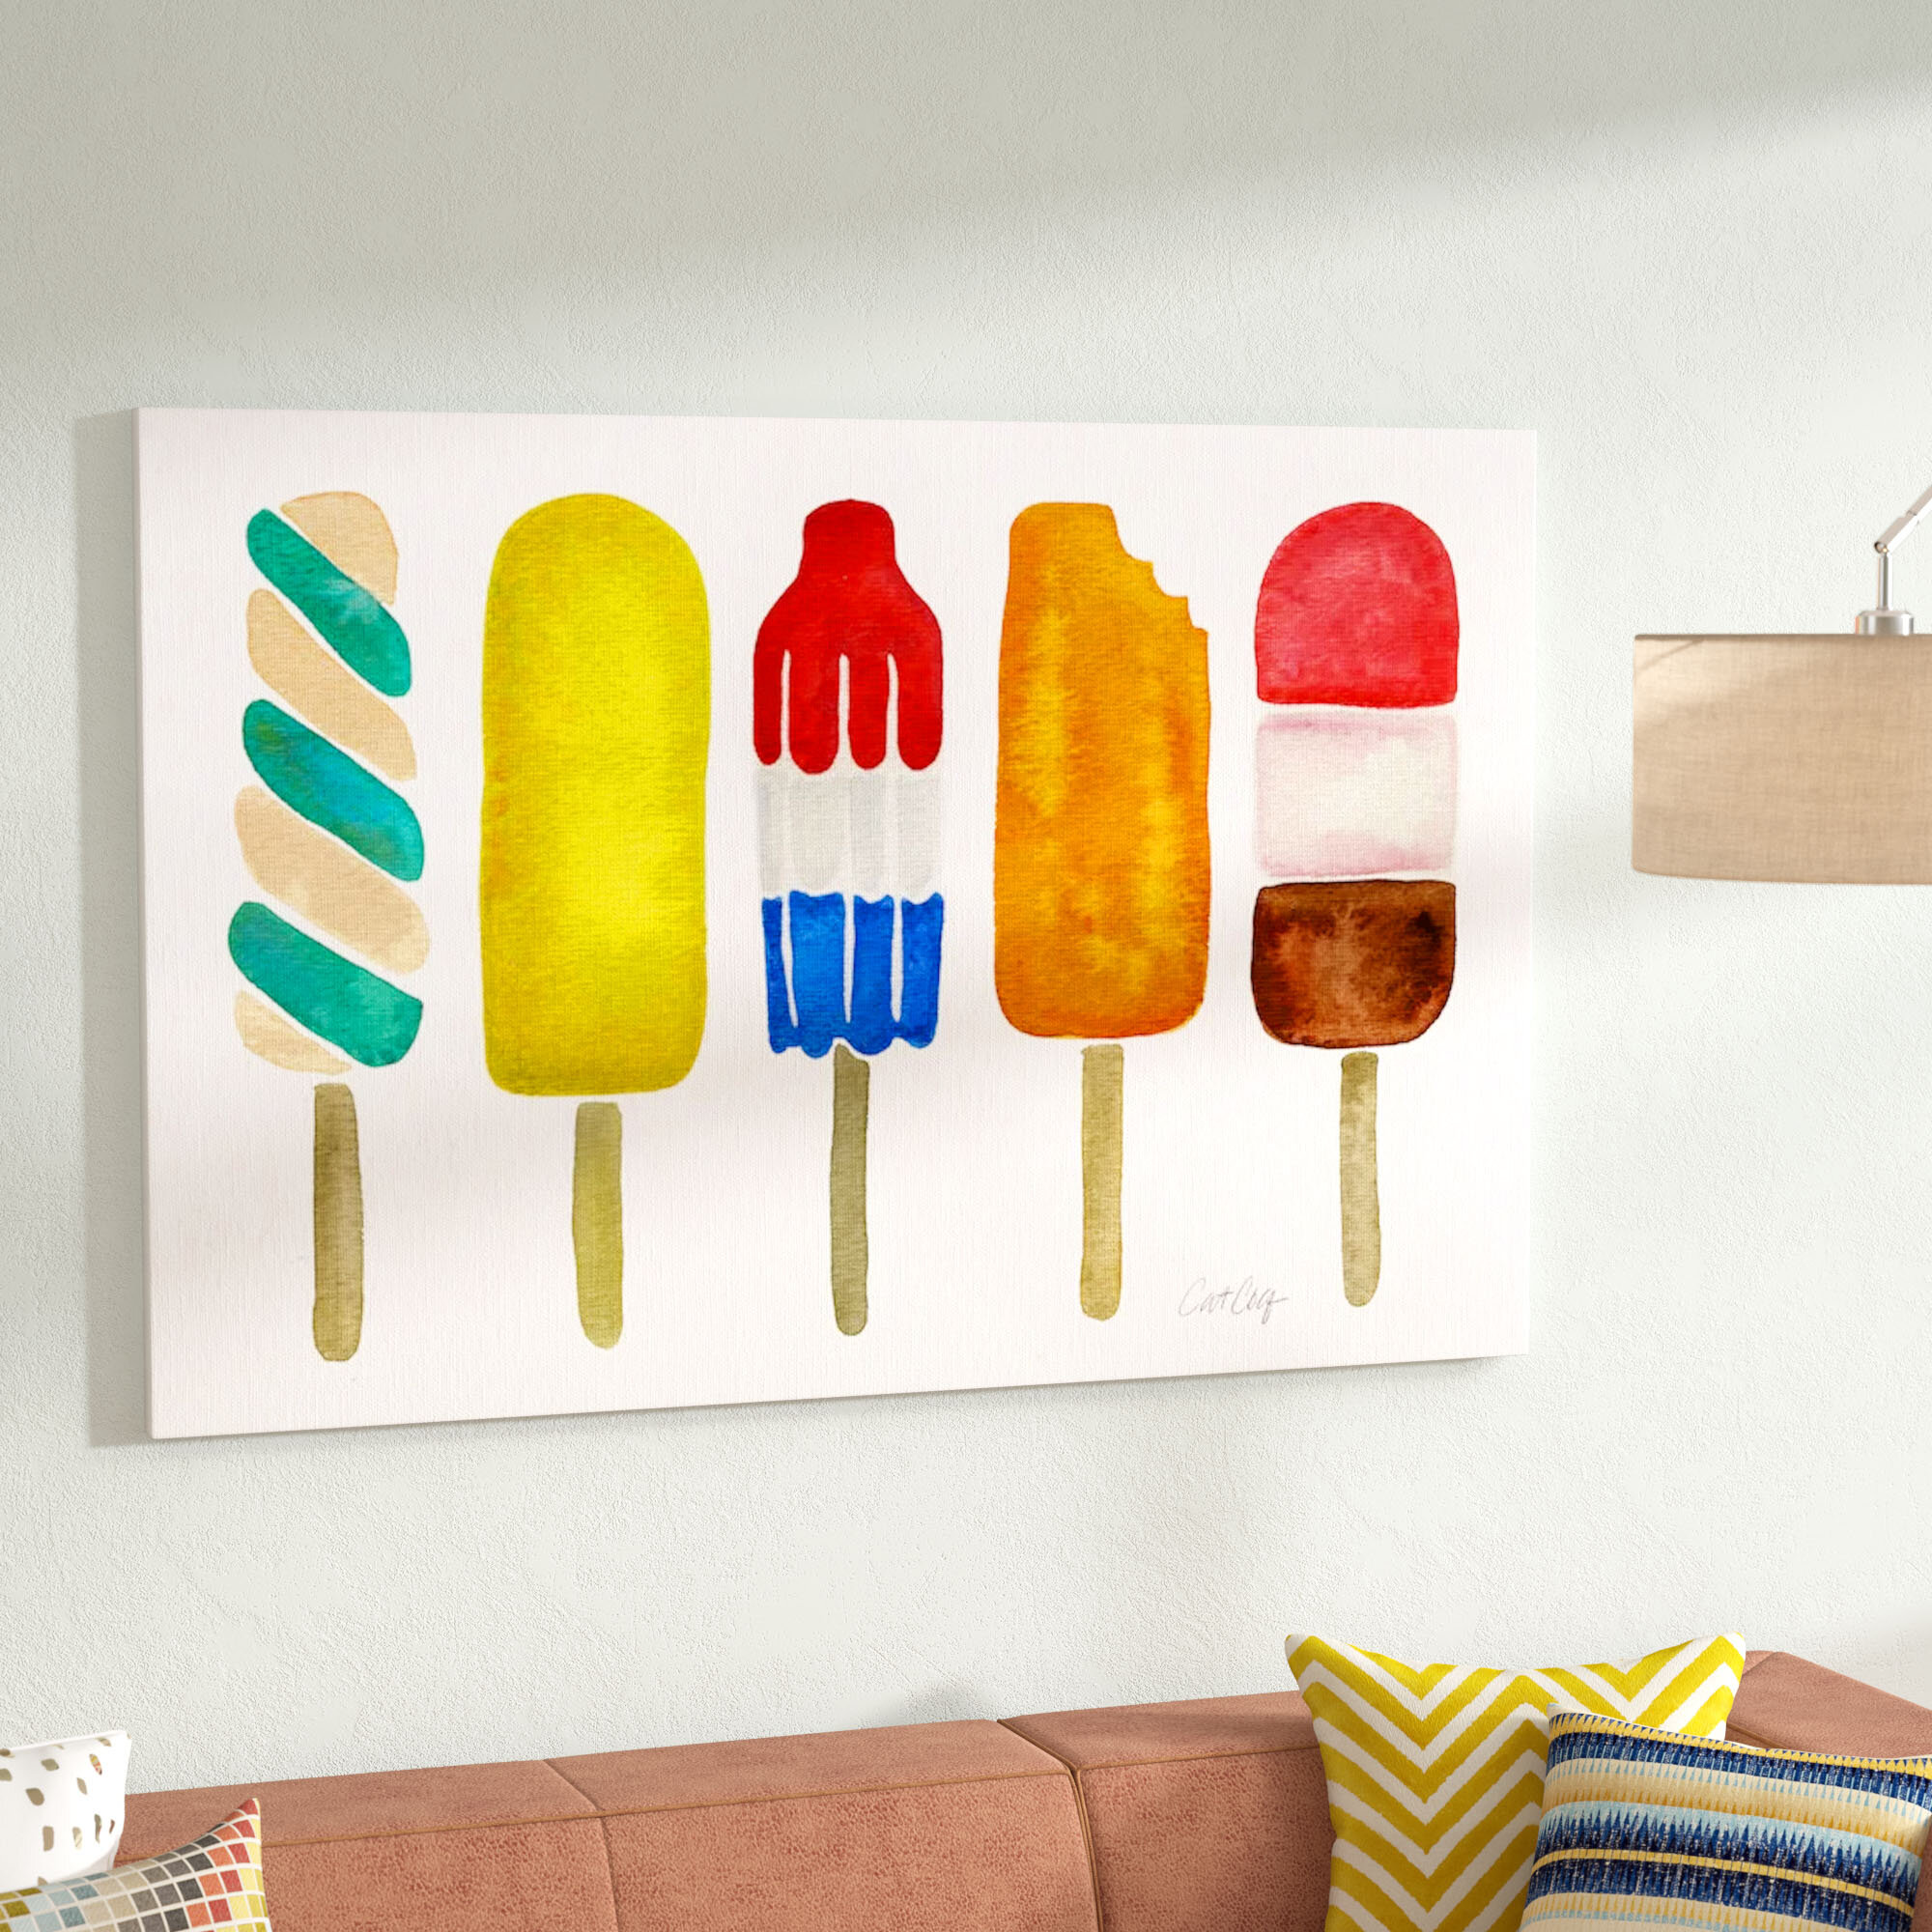 The big chill: popsicle fun, for Pop, on Father's Day